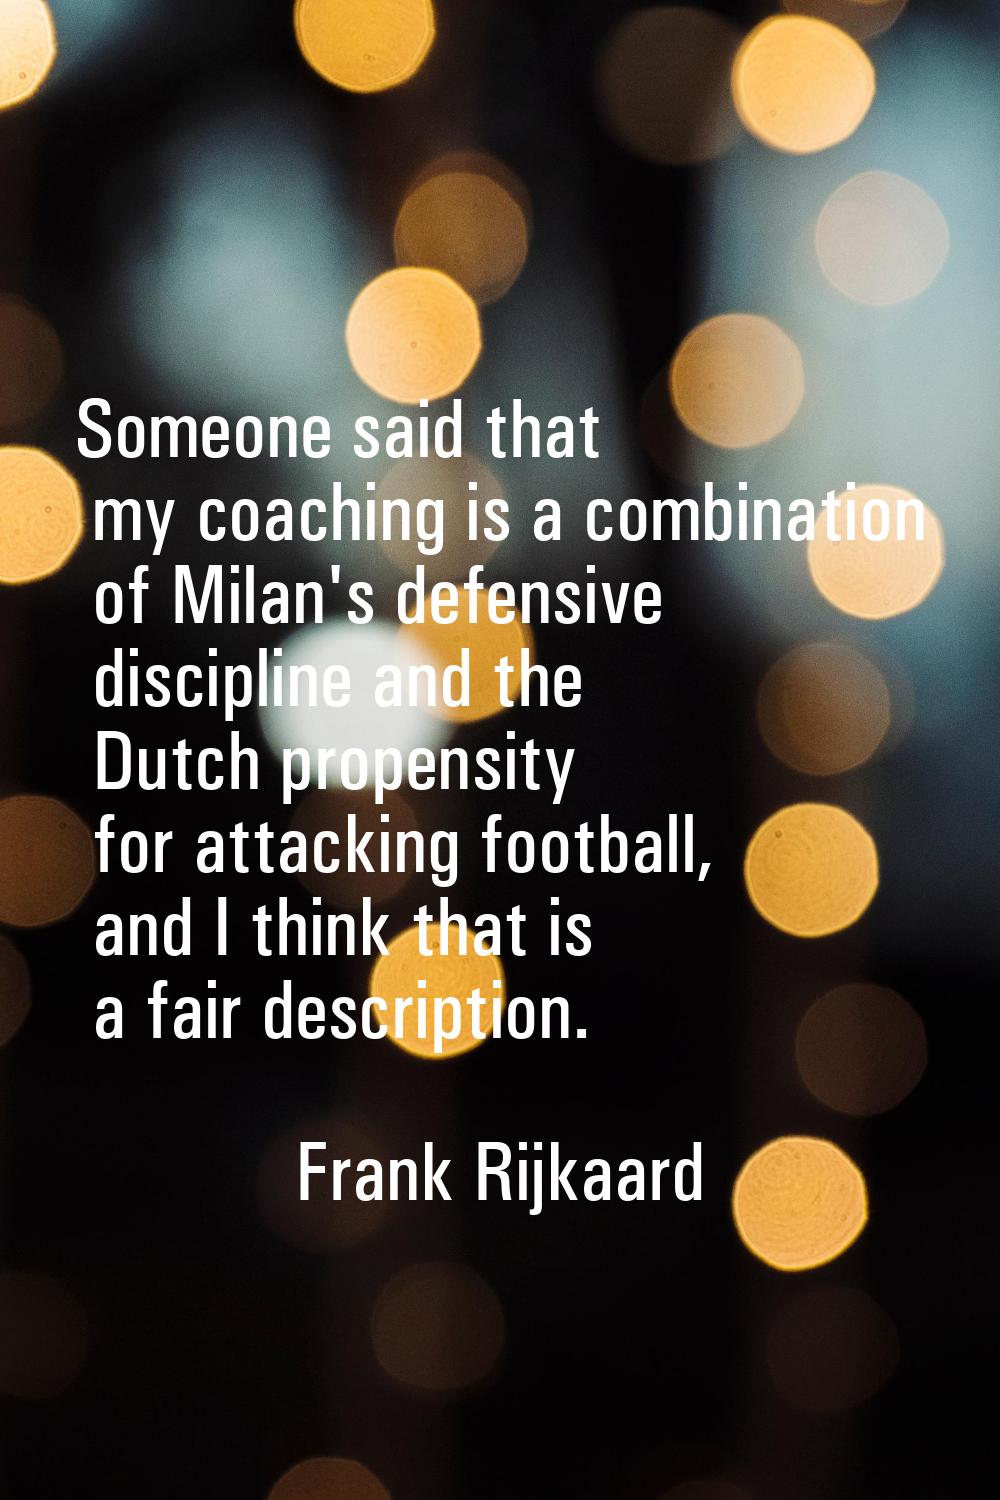 Someone said that my coaching is a combination of Milan's defensive discipline and the Dutch propen